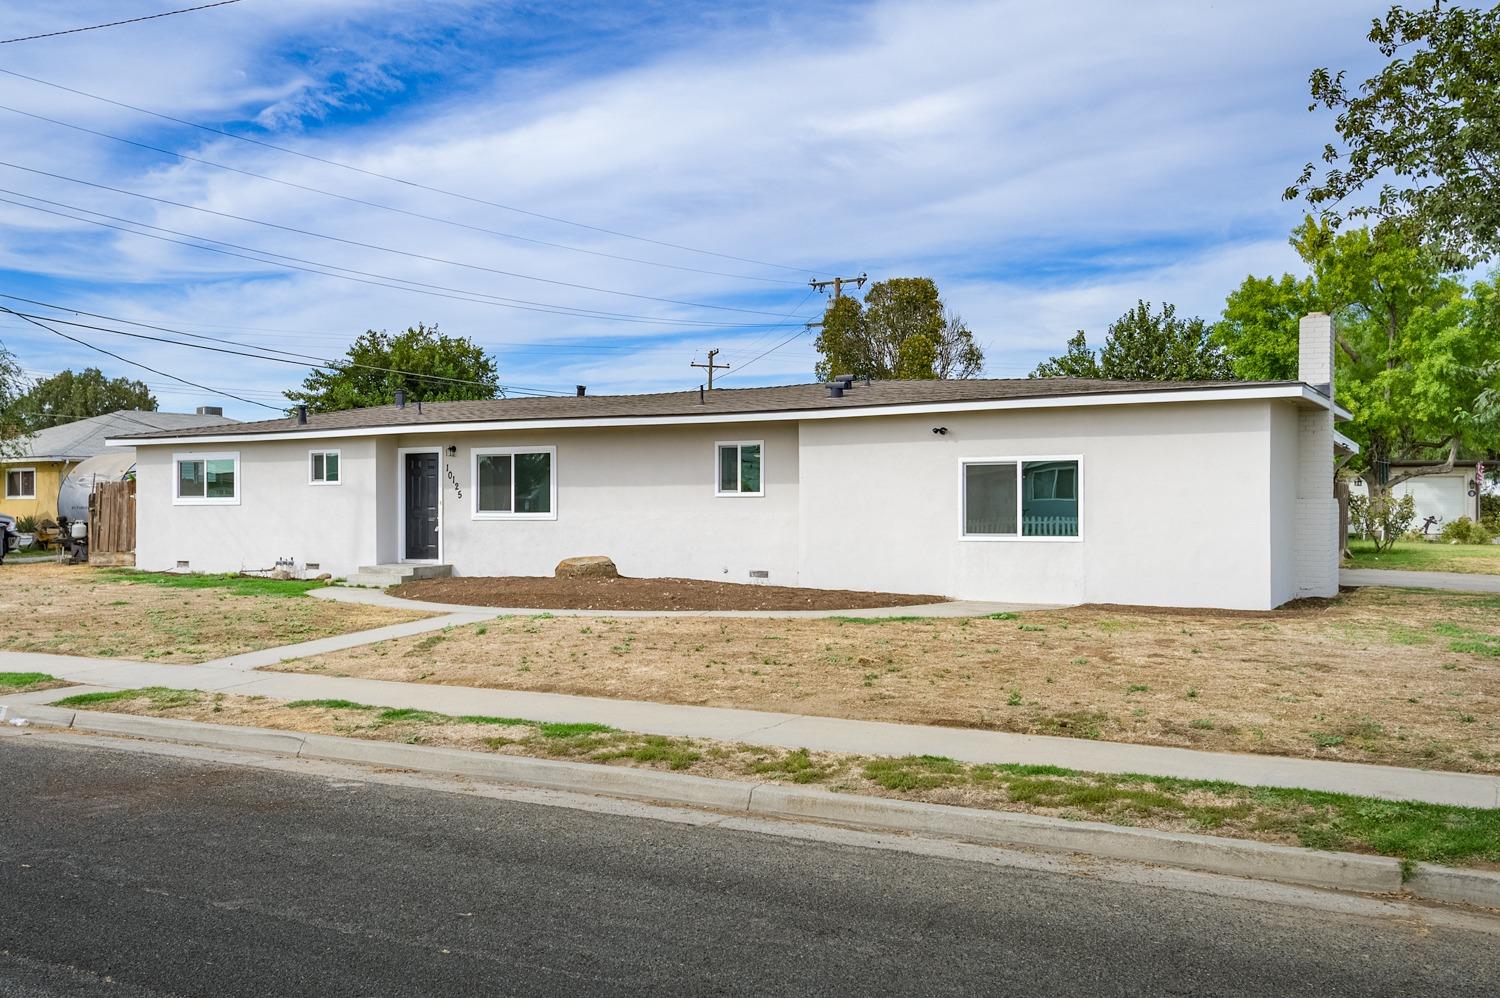 Welcome to 10125 El Toro Way in Hanford, CA! This fully remodeled home features three bedrooms and two bathrooms. The living room has a cozy fireplace. The open kitchen is equipped with modern appliances. Step outside to a spacious backyard, perfect for relaxation and fun. This charming property is move in ready and waiting for you to call it home!